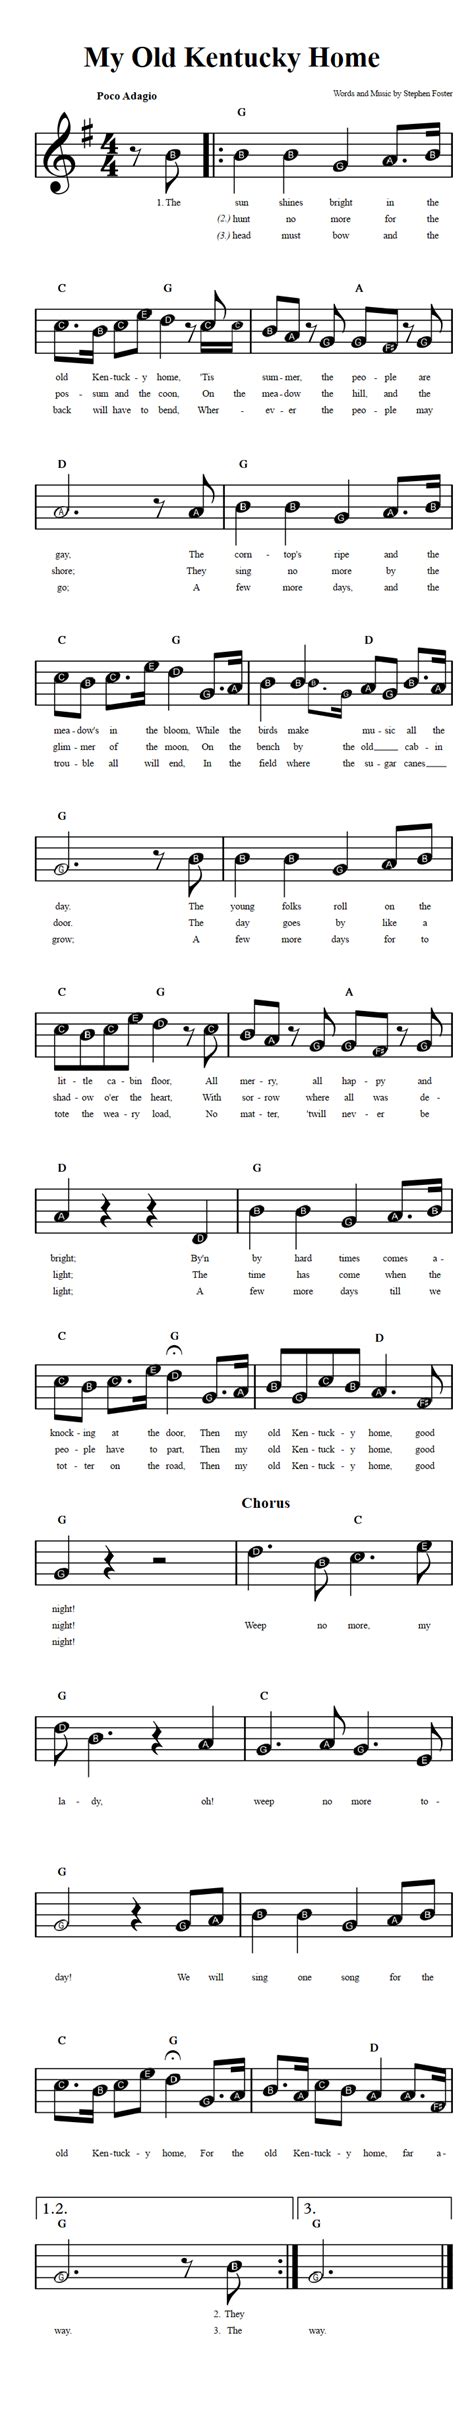 My Old Kentucky Home Beginner Sheet Music With Chords And Lyrics